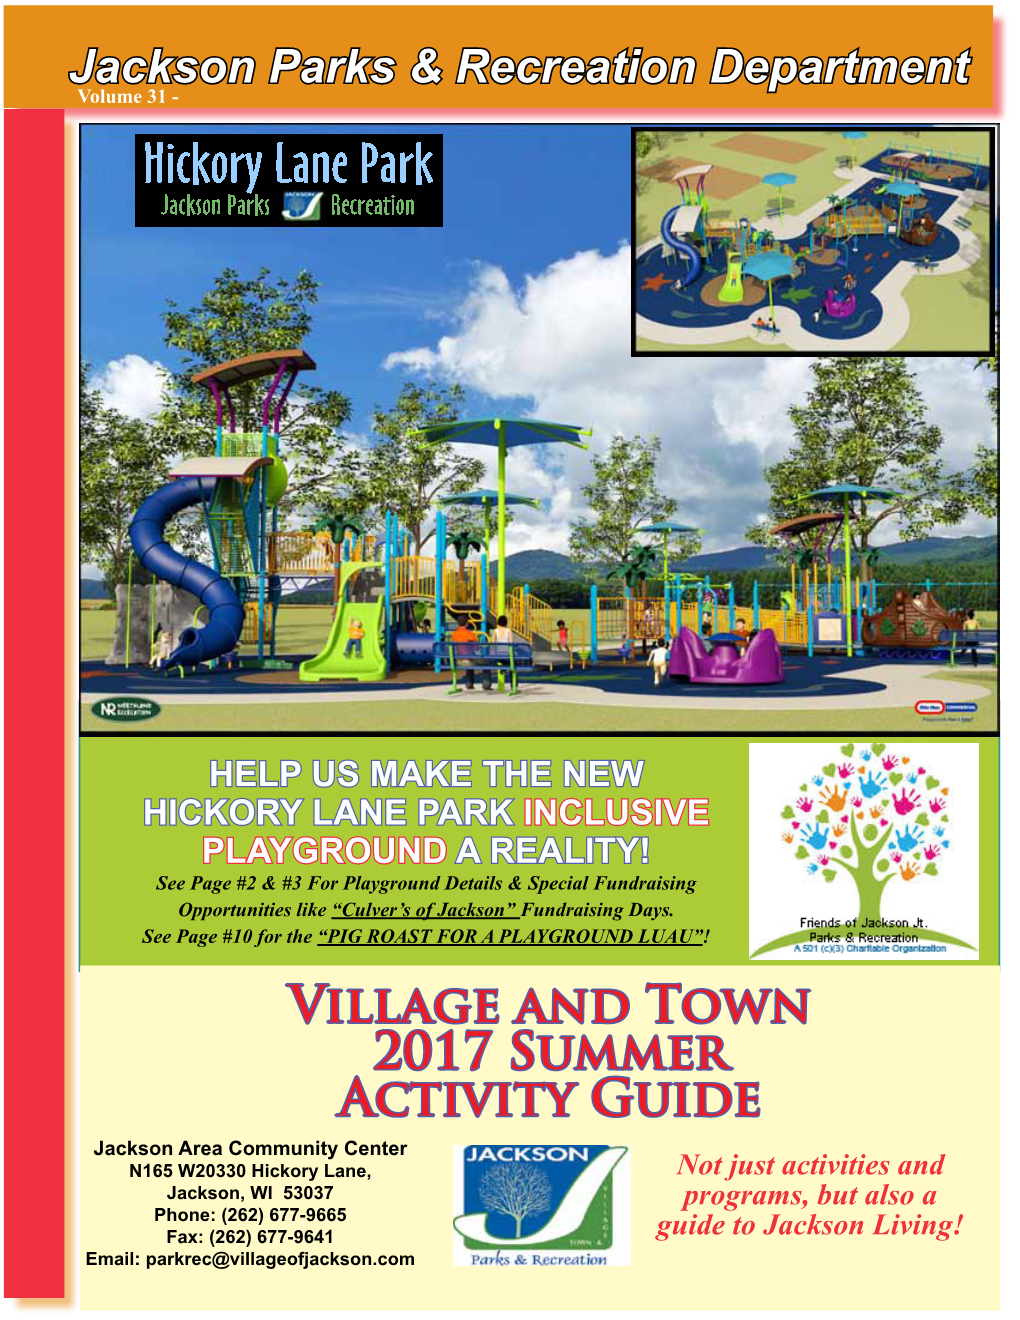 Village and Town 2017 Summer Activity Guide